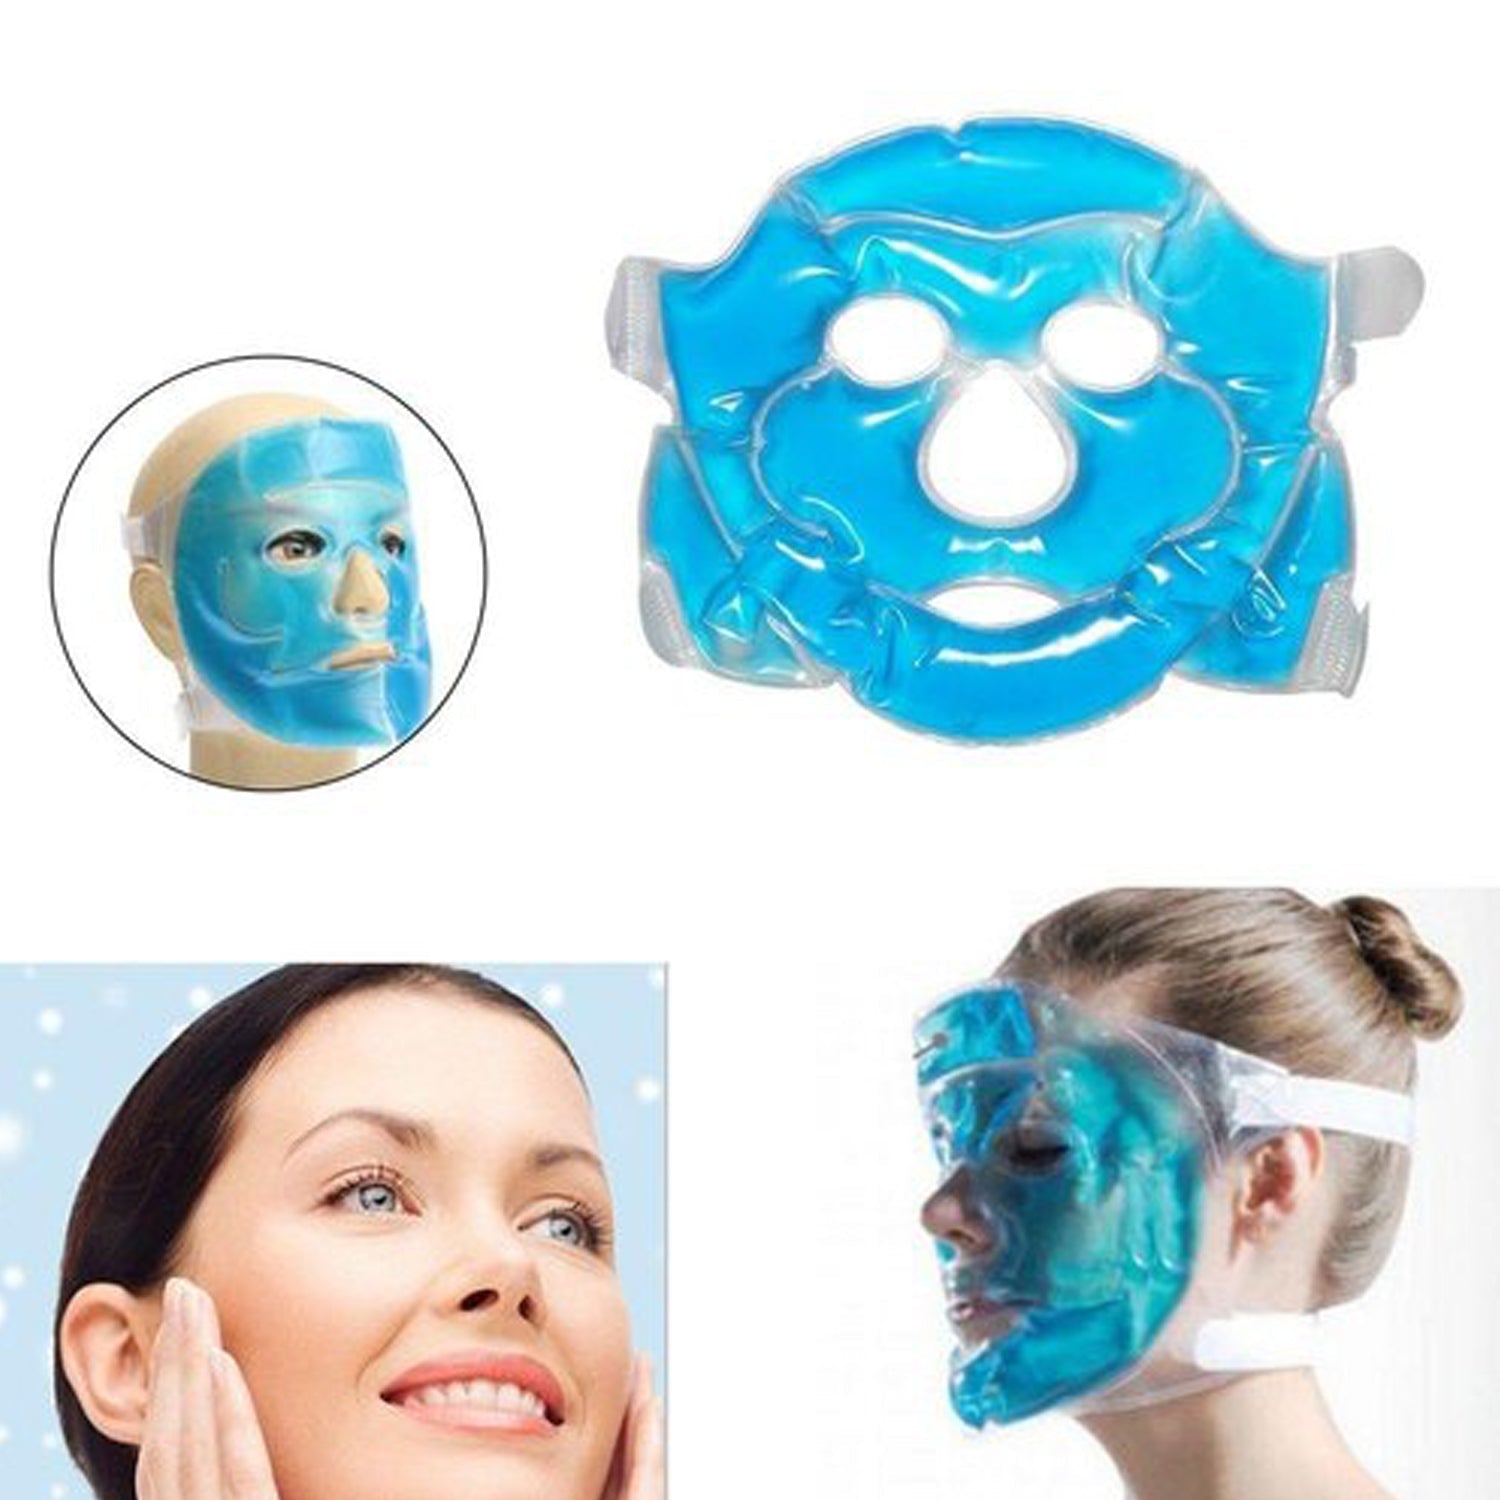 0380 Cooling Gel Face Mask with Strap-on Velcro, Medium